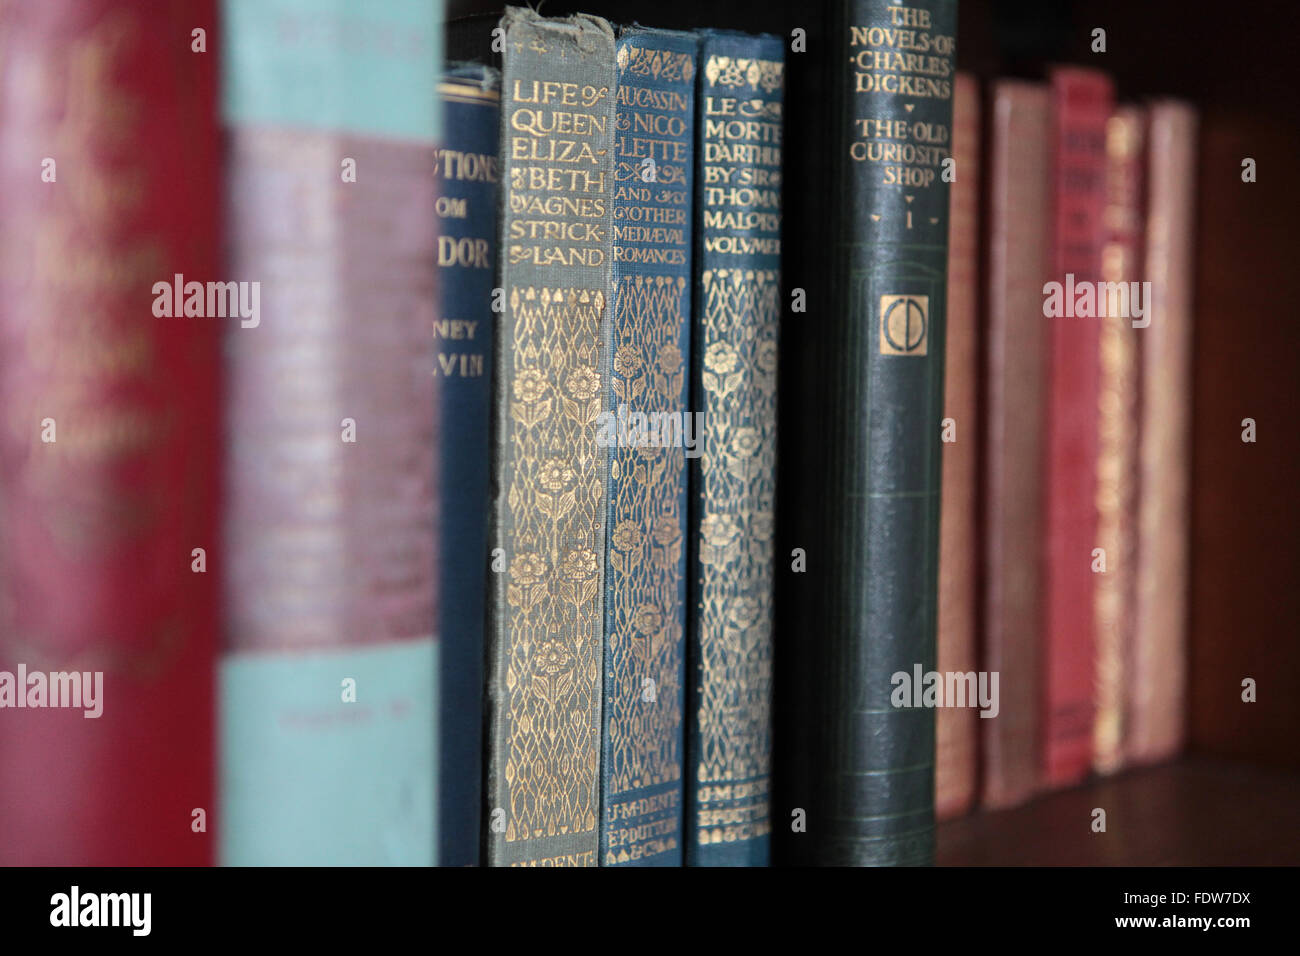 Old, vintage, colourful books on book shelf Stock Photo